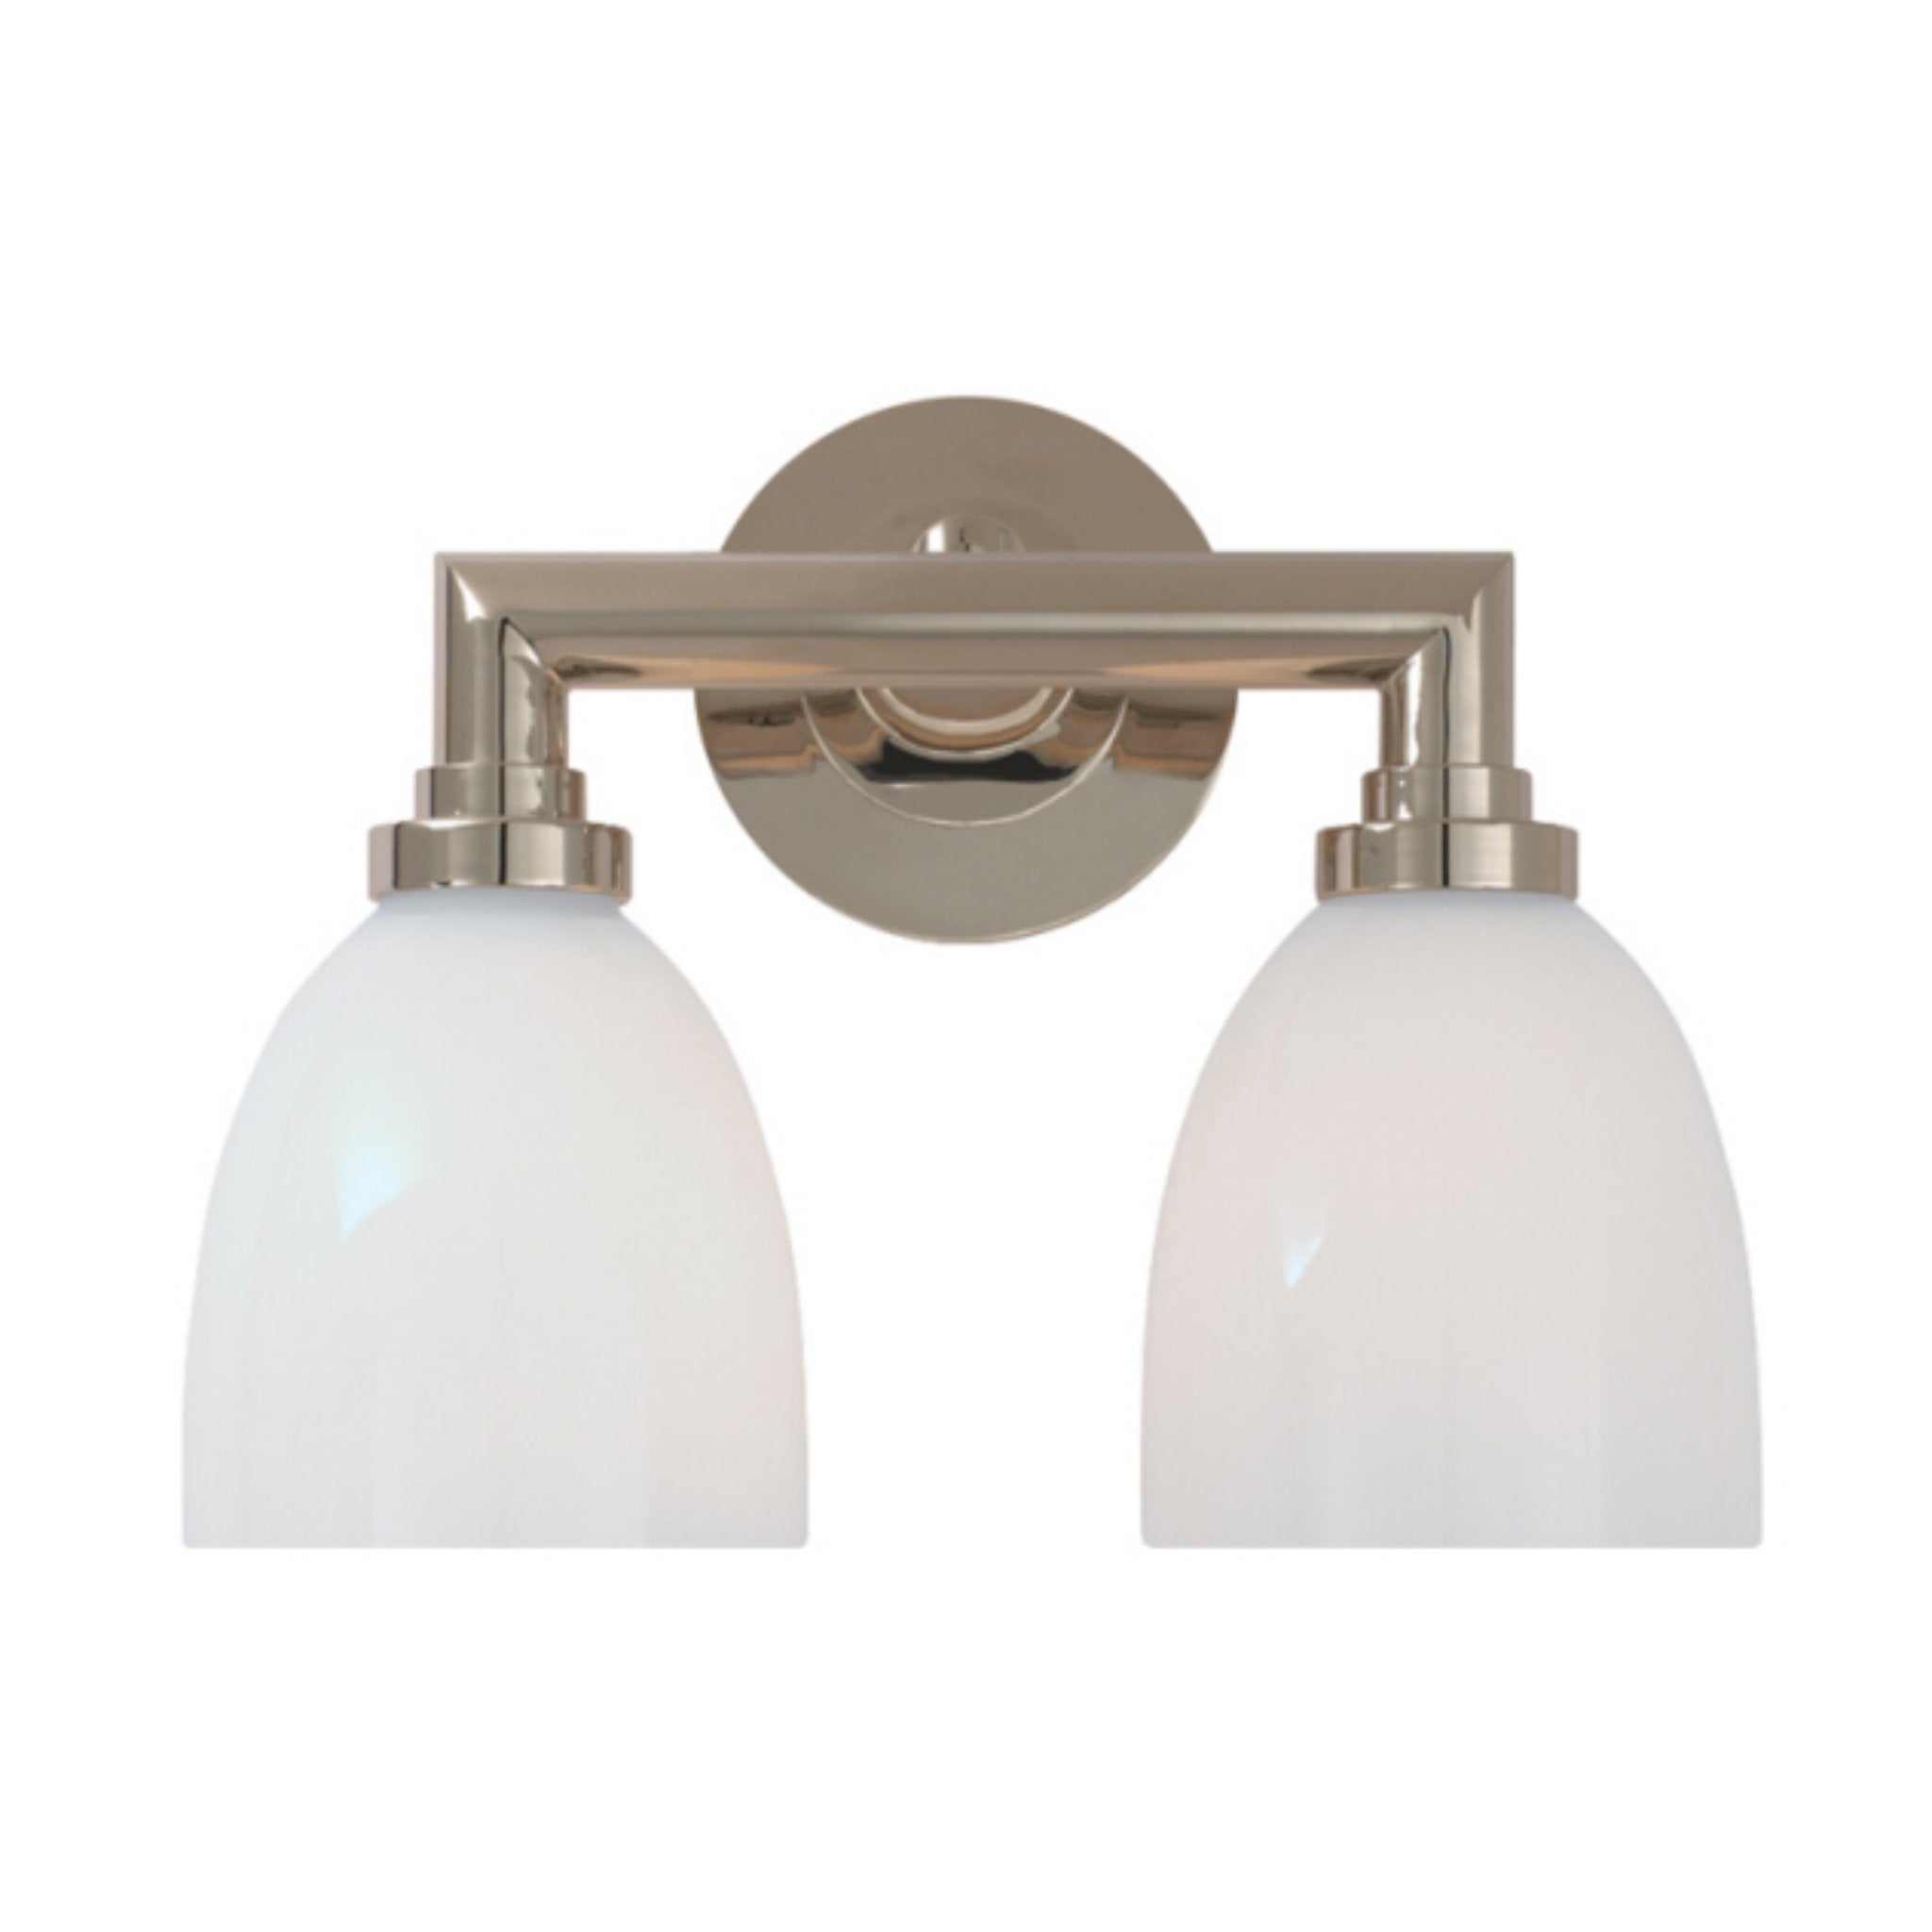 Chapman Right Angle 2 Light Decorative Wall Light in Polished Nickel 